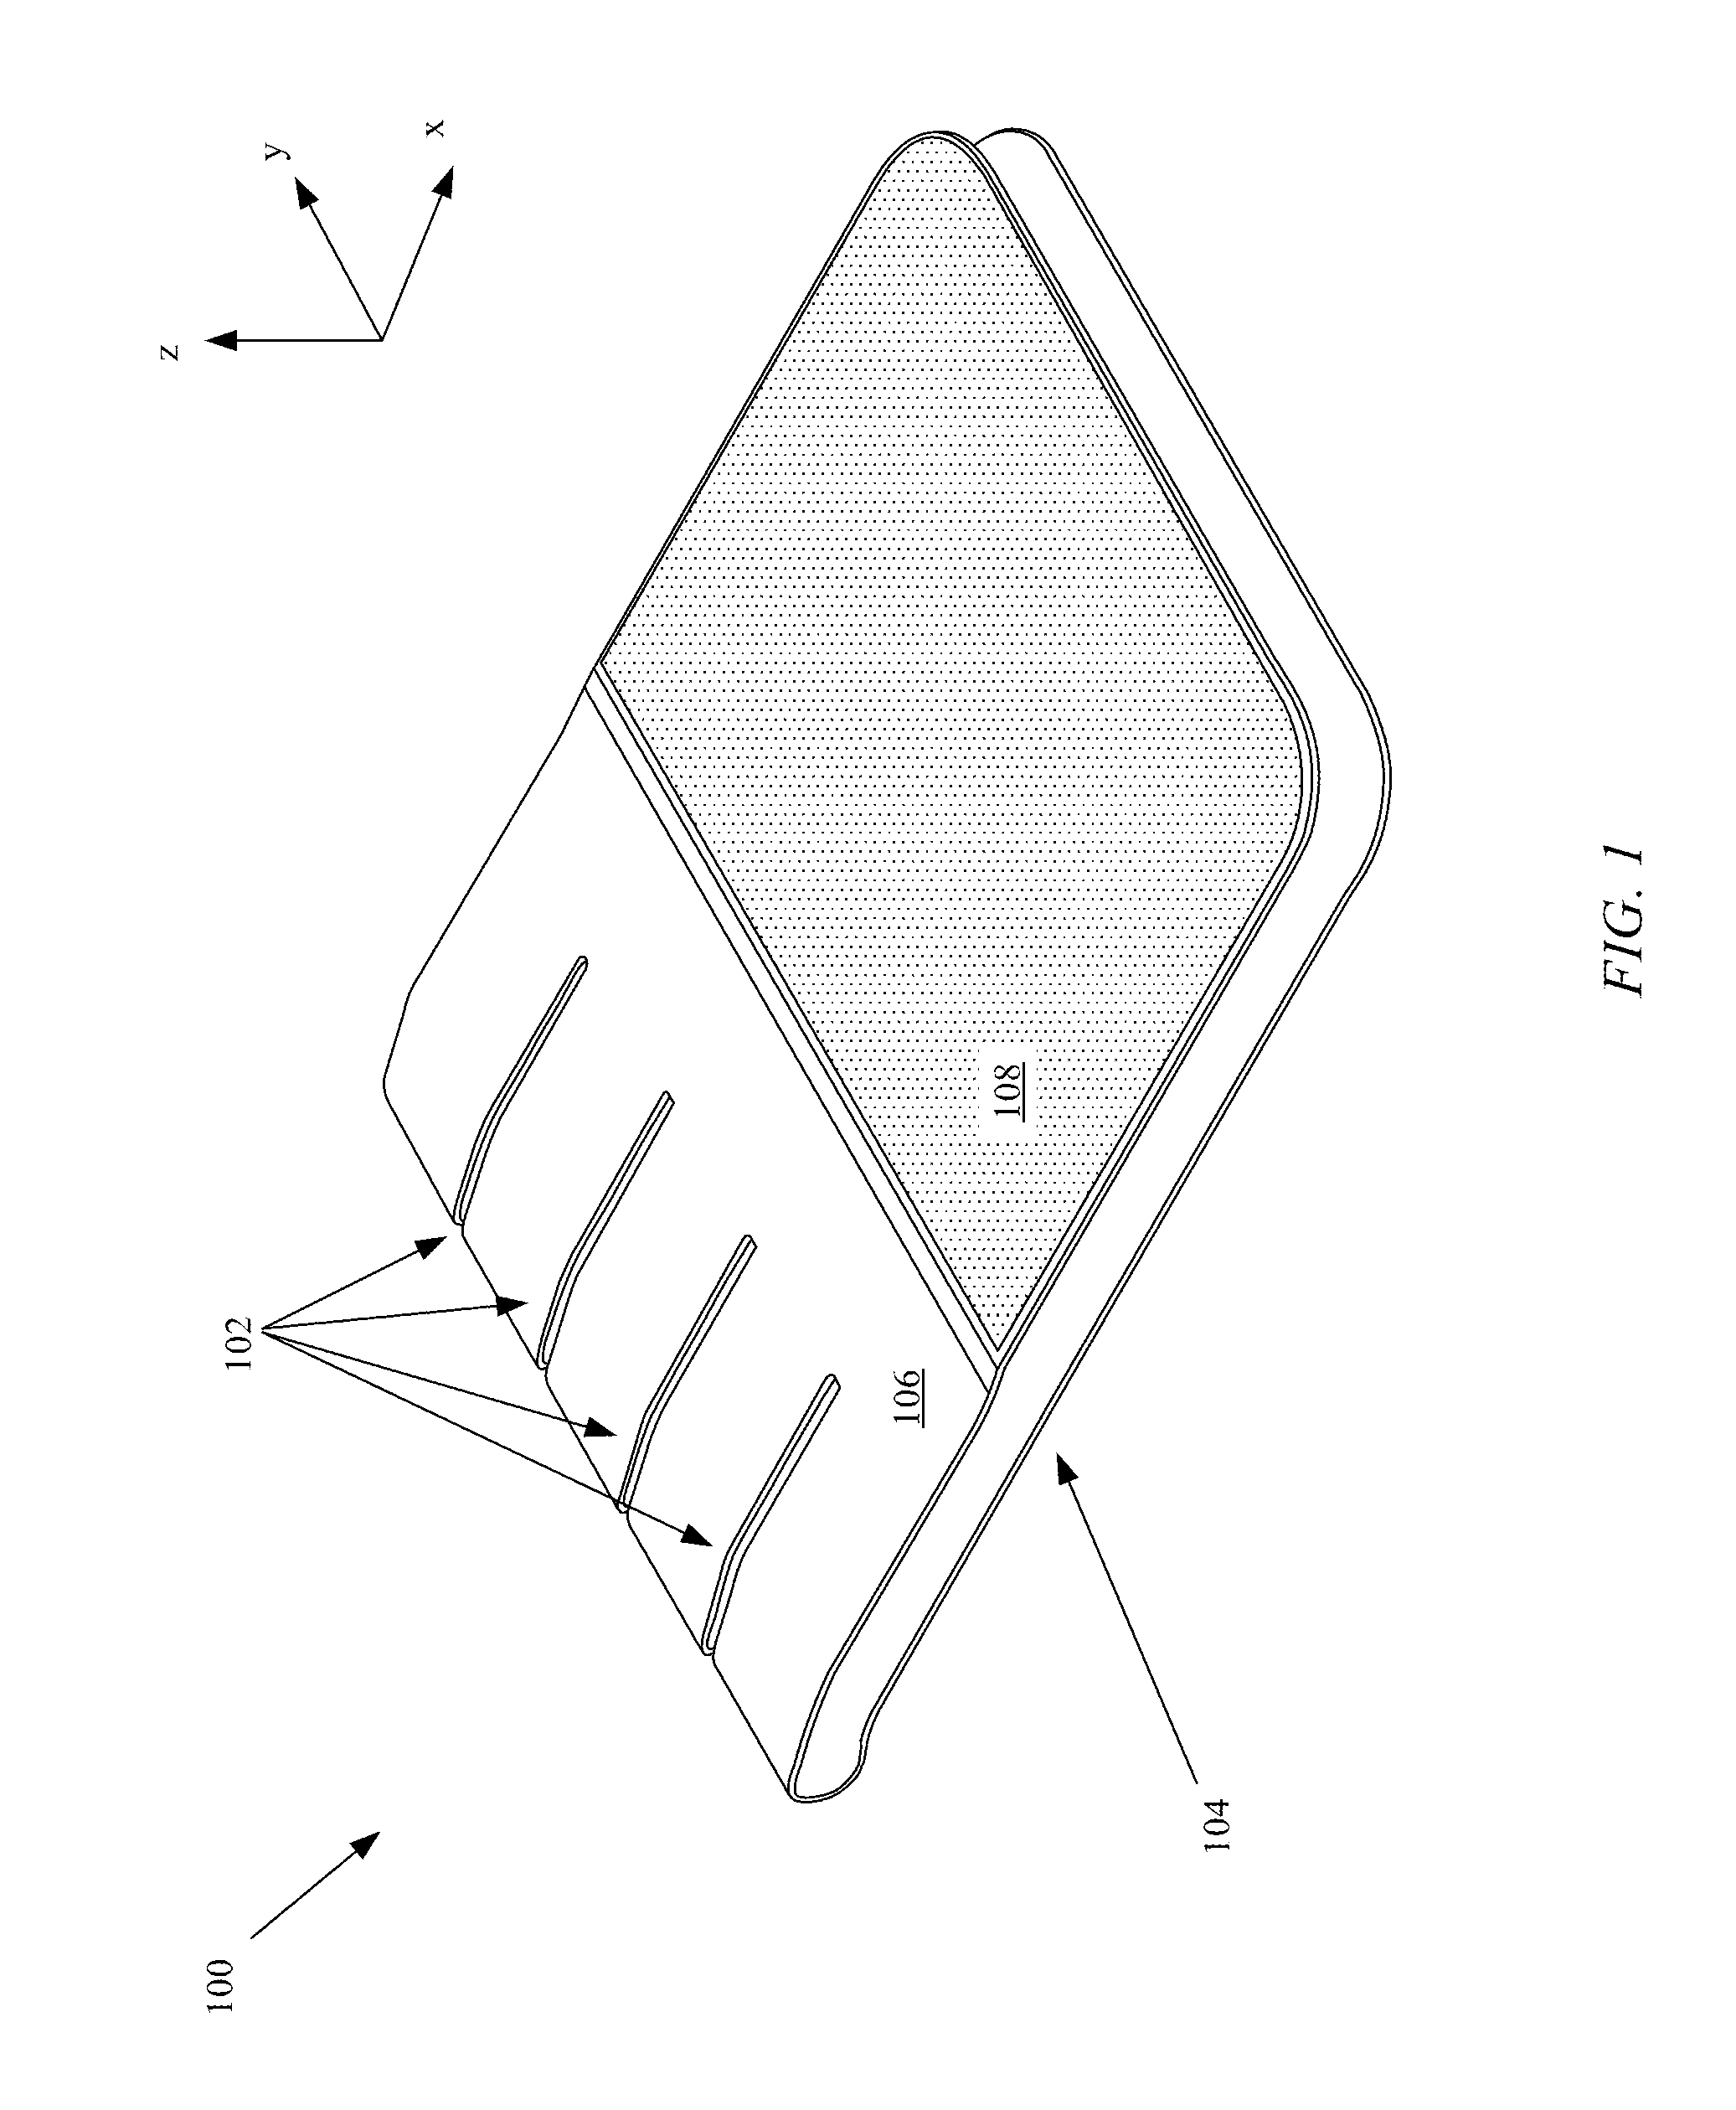 Conductive connections allowing XYZ translation